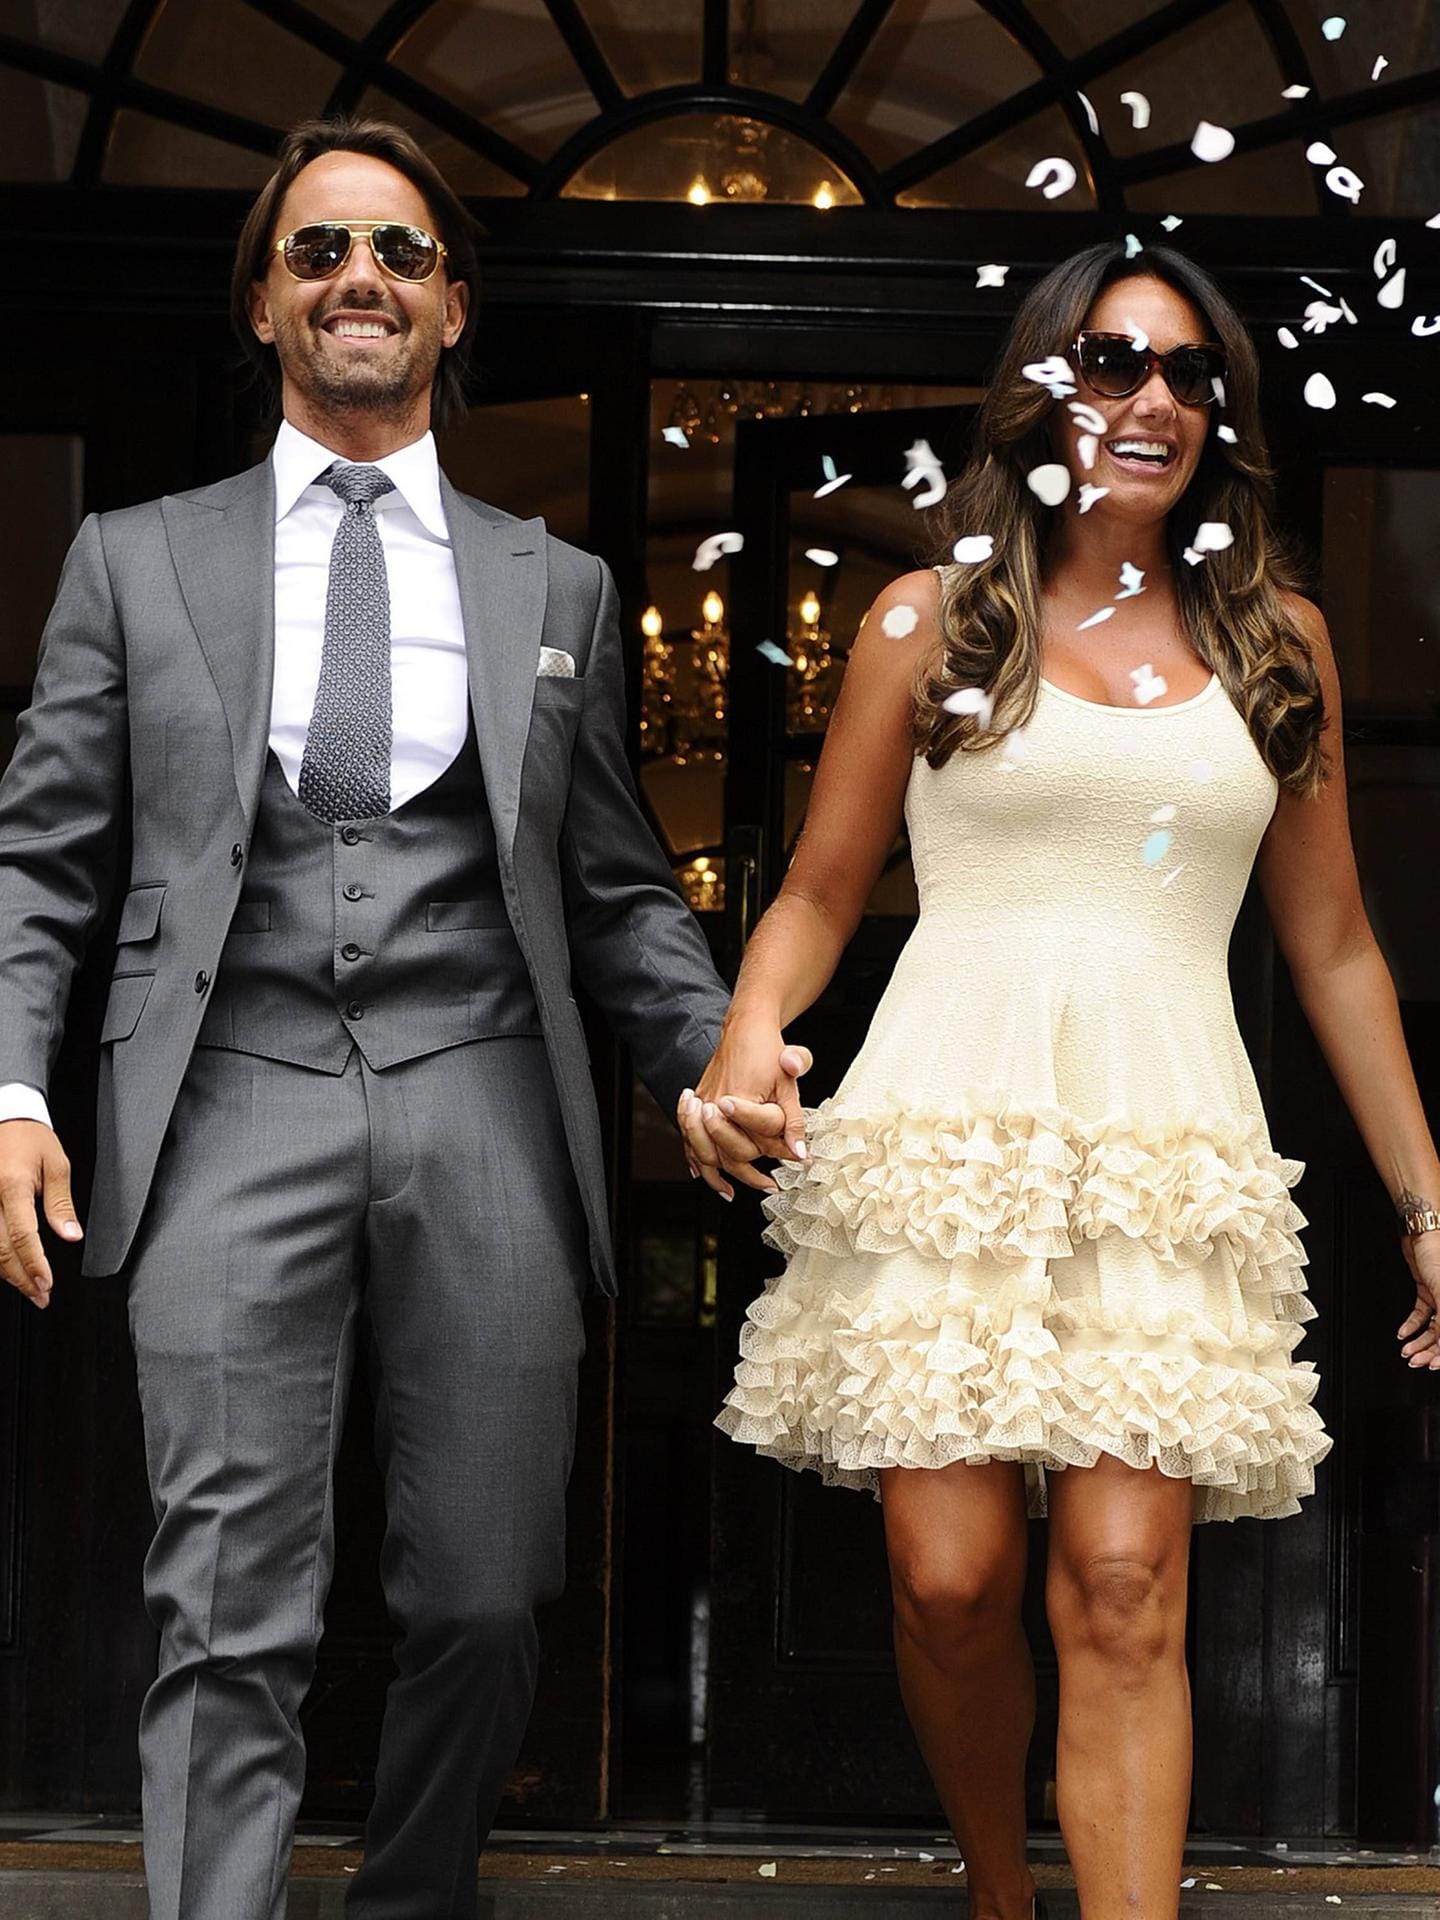 Tamara Ecclestone leaves Chelsea registry office with Jay Rutland after her wedding ceremony Monday